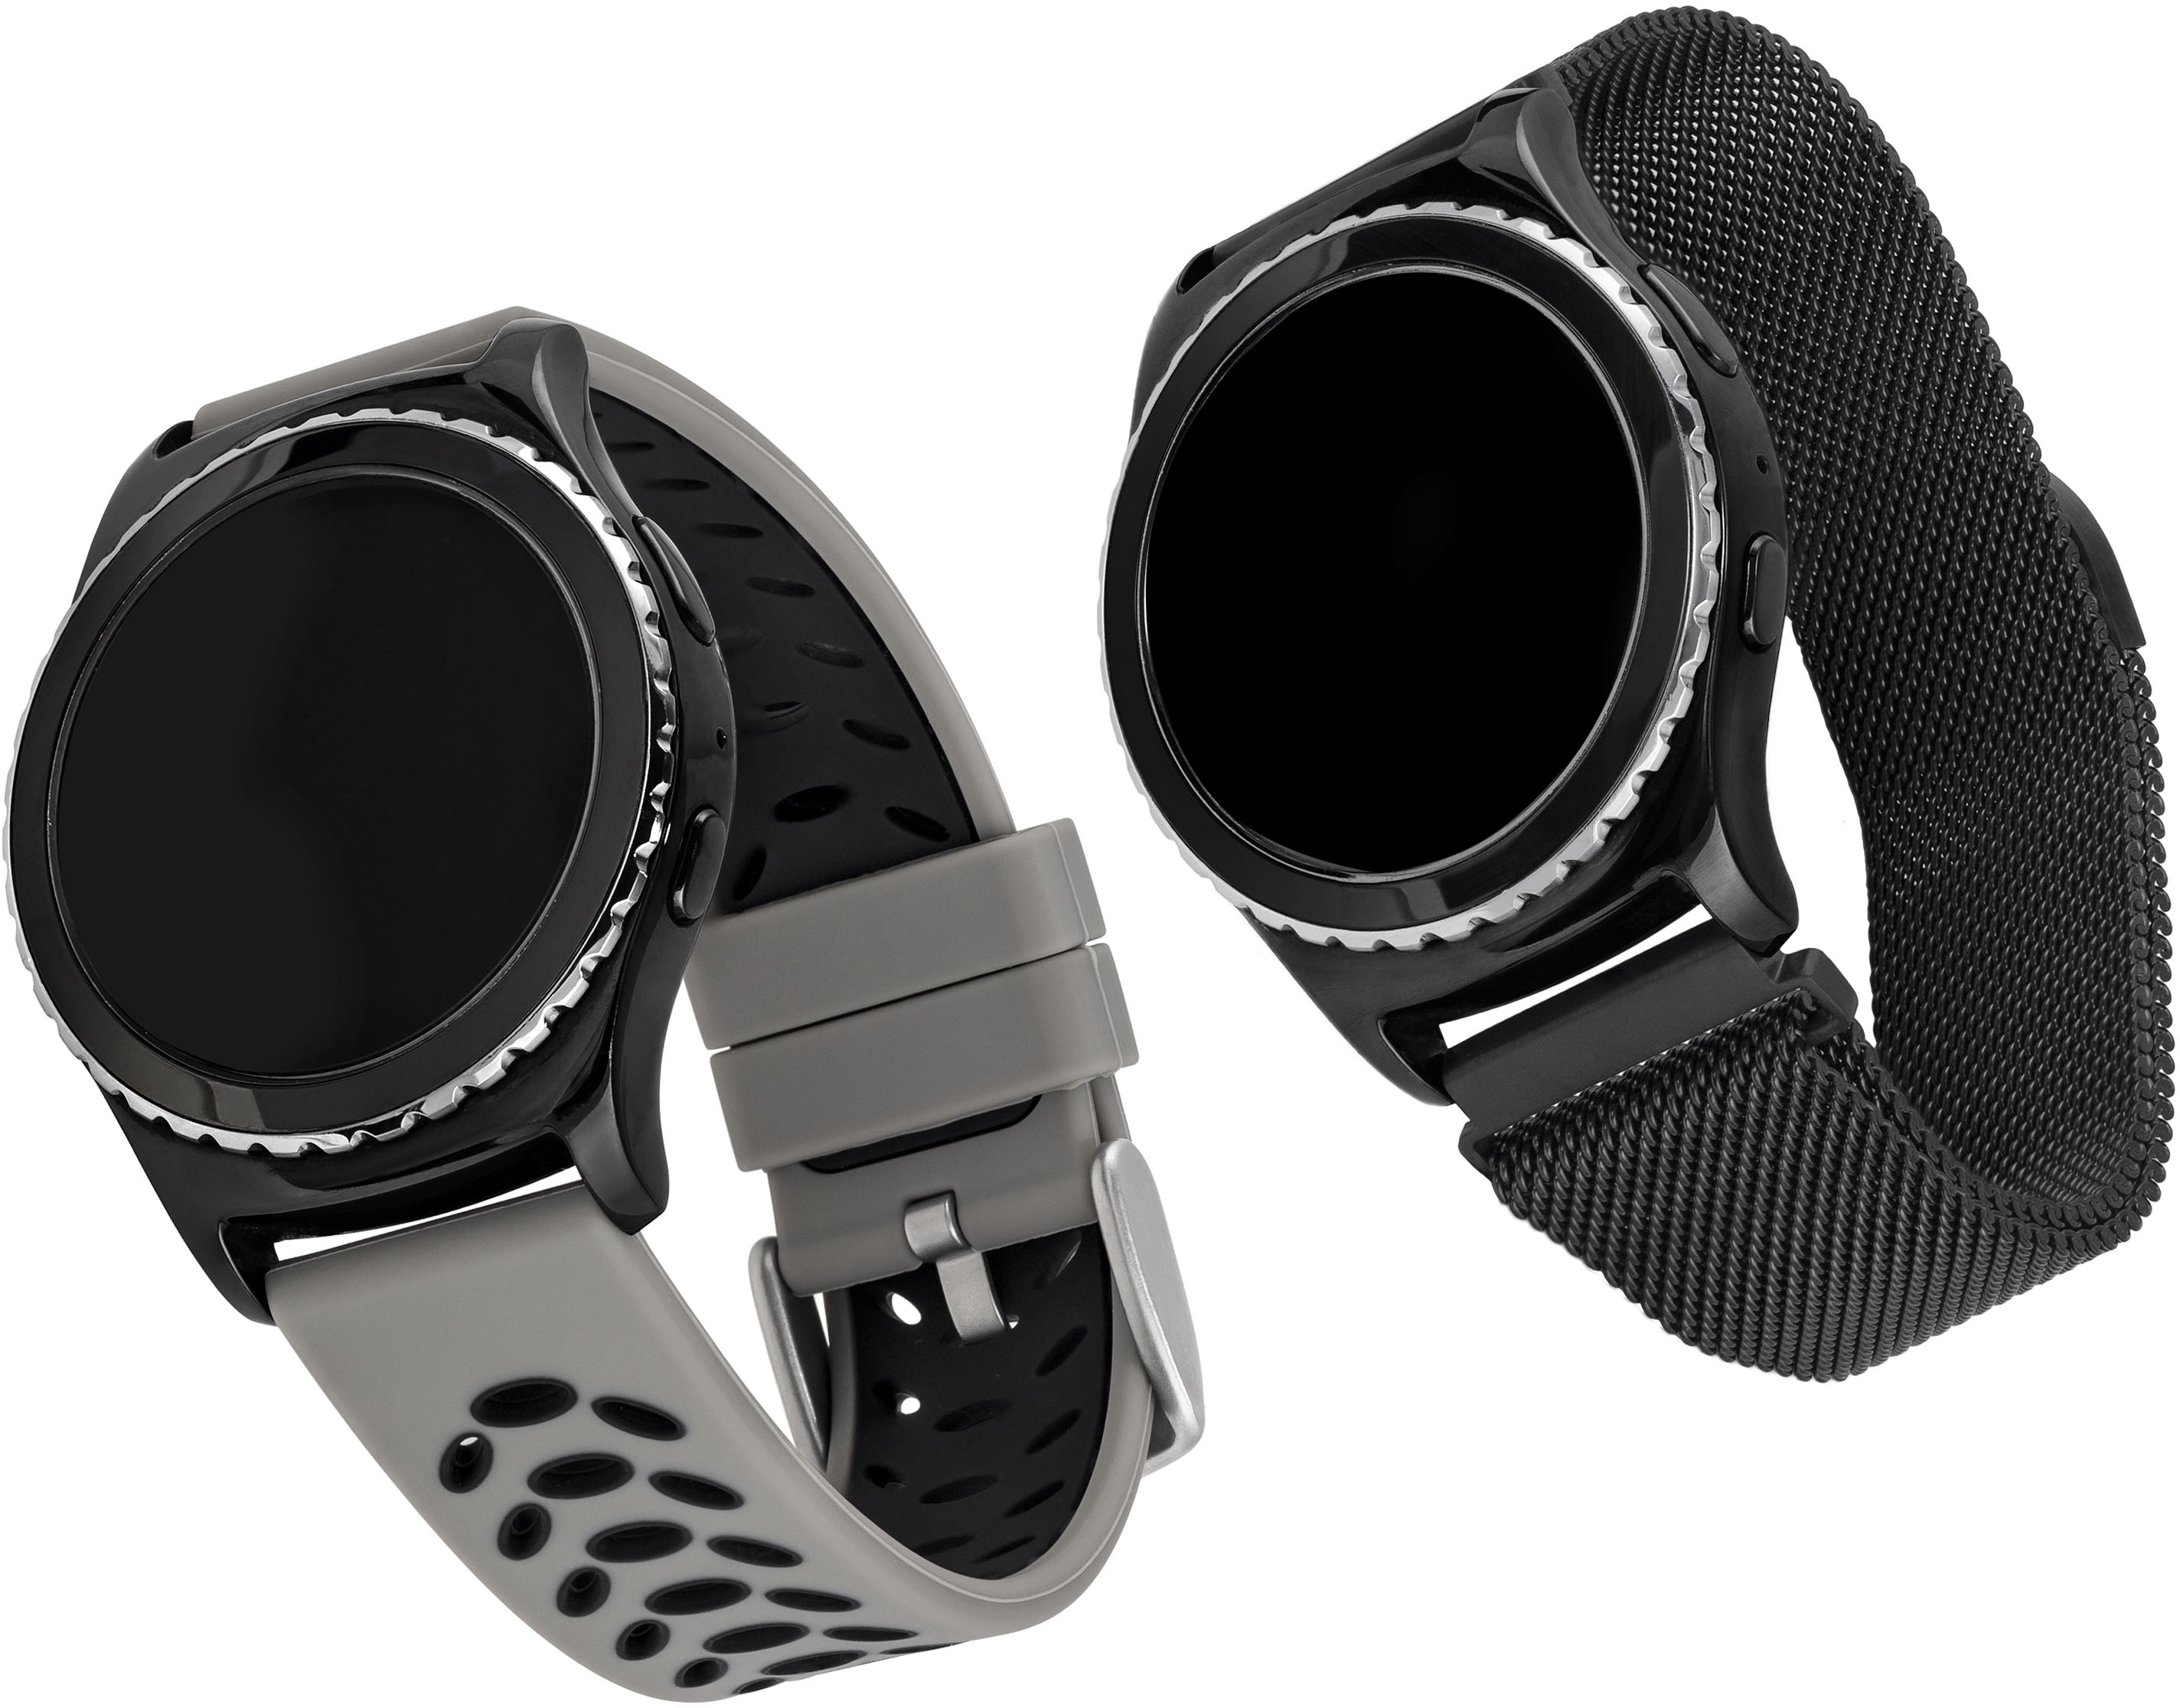 WITHit Universal Smartwatch Silicone and Mesh Sport Band 2-Pack for Samsung Galaxy Watch Active and Watch Active2 20mm Woven Black/Grey/Black 54285BBR - Buy